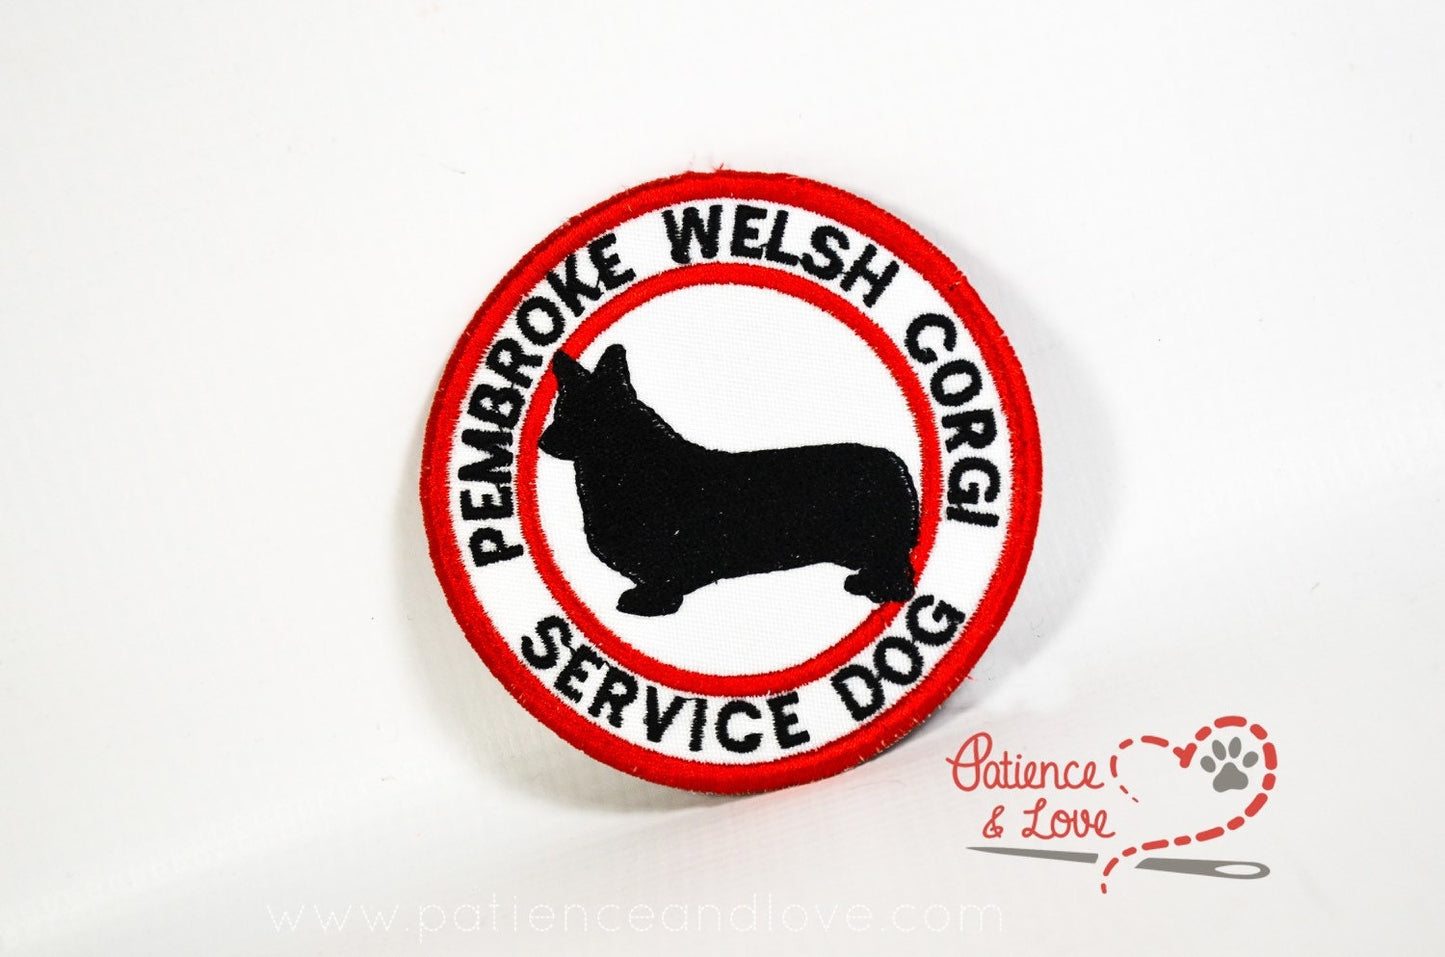 Breed, Pembroke Welsh Corgi Service Dog, Select your breed, 3 inch round patch